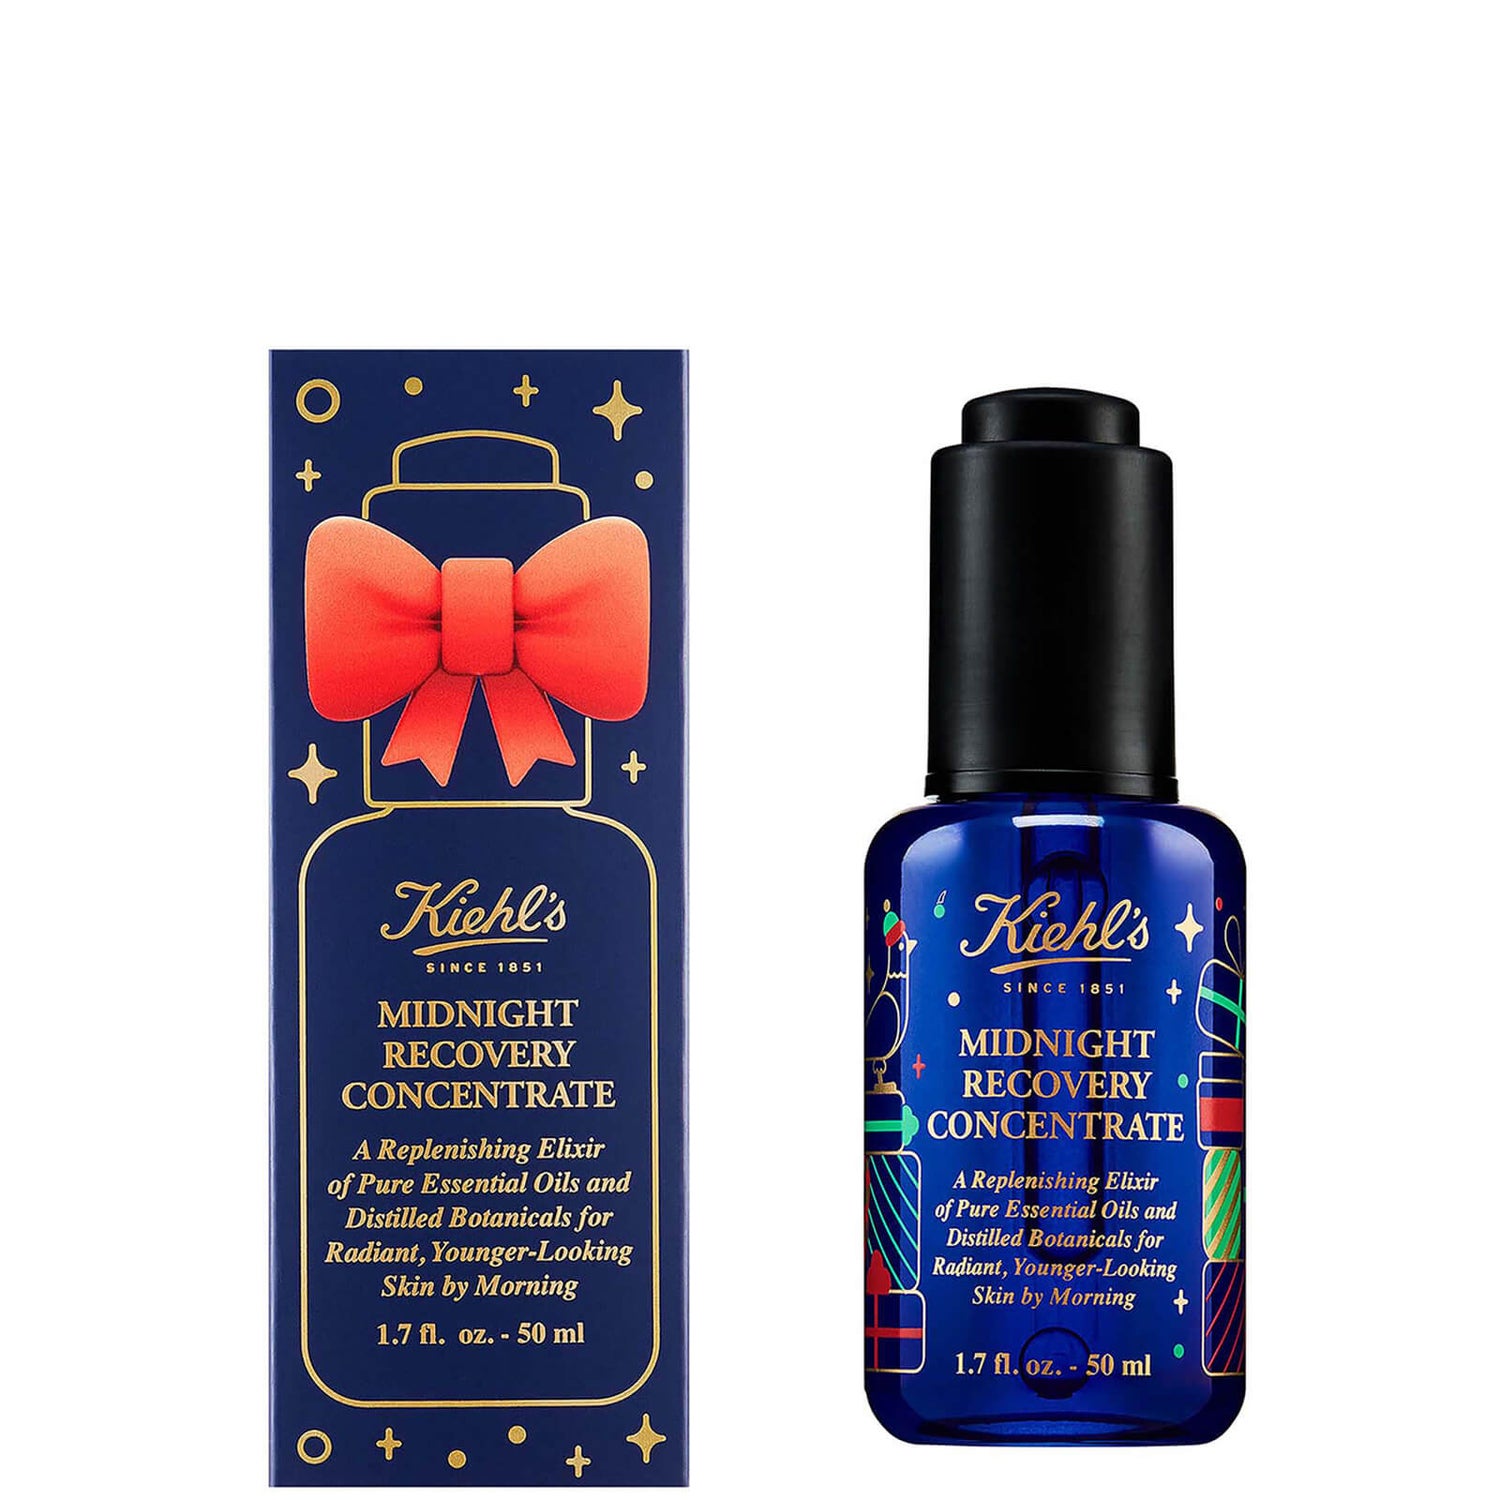 Kiehl's Midnight Recovery Concentrate Limited Edition 50ml .